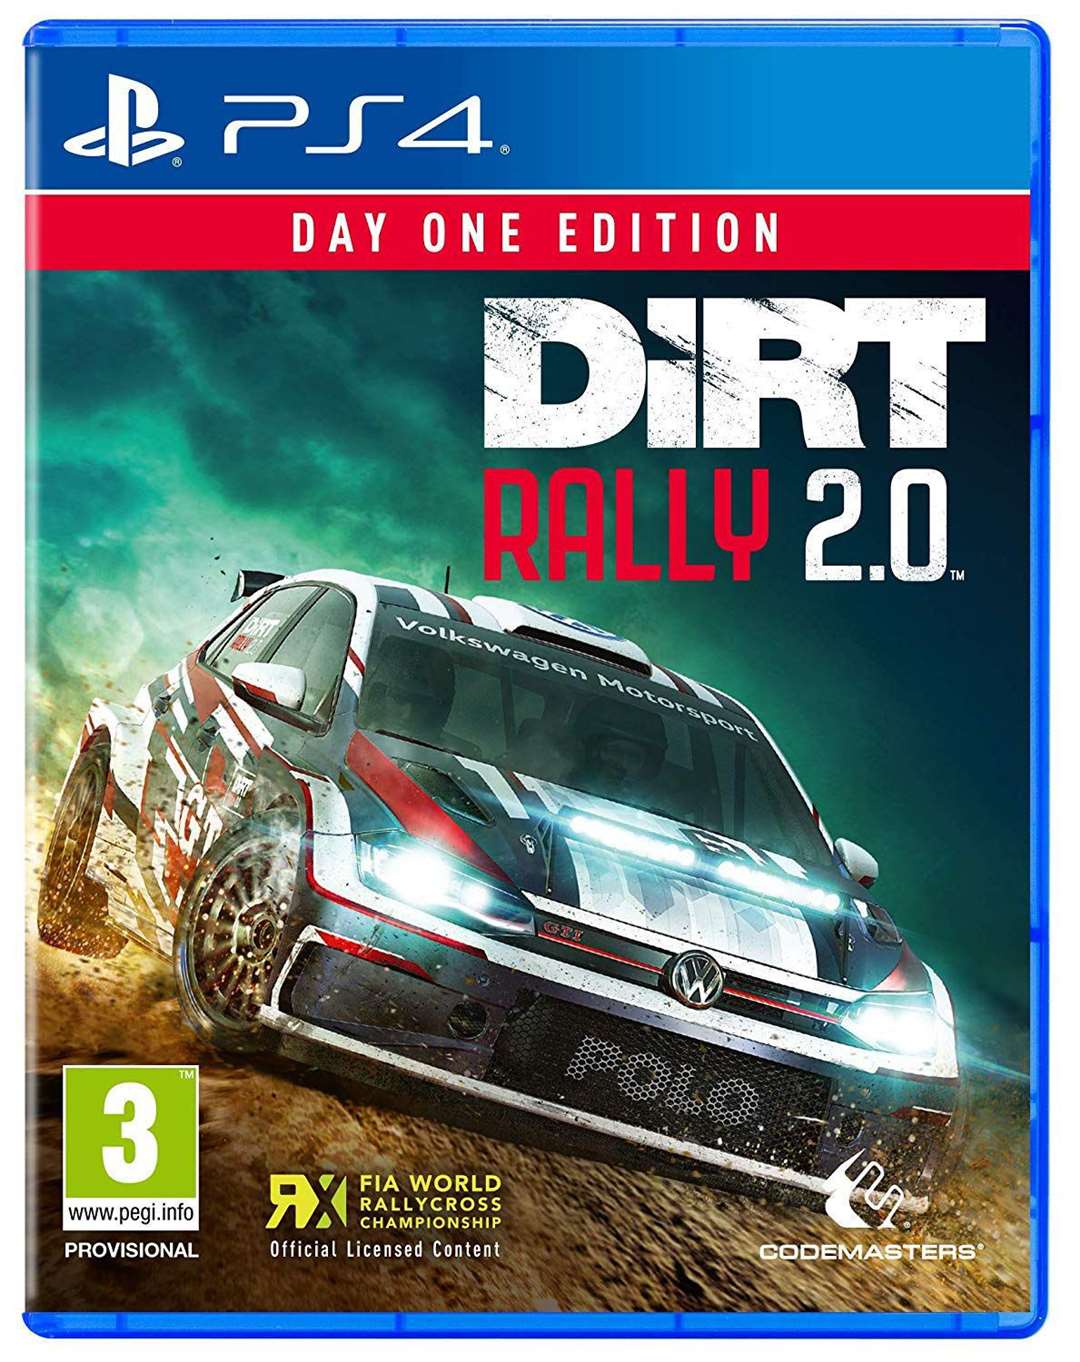 Dirt Rally 2.0. Picture: Handout/PA